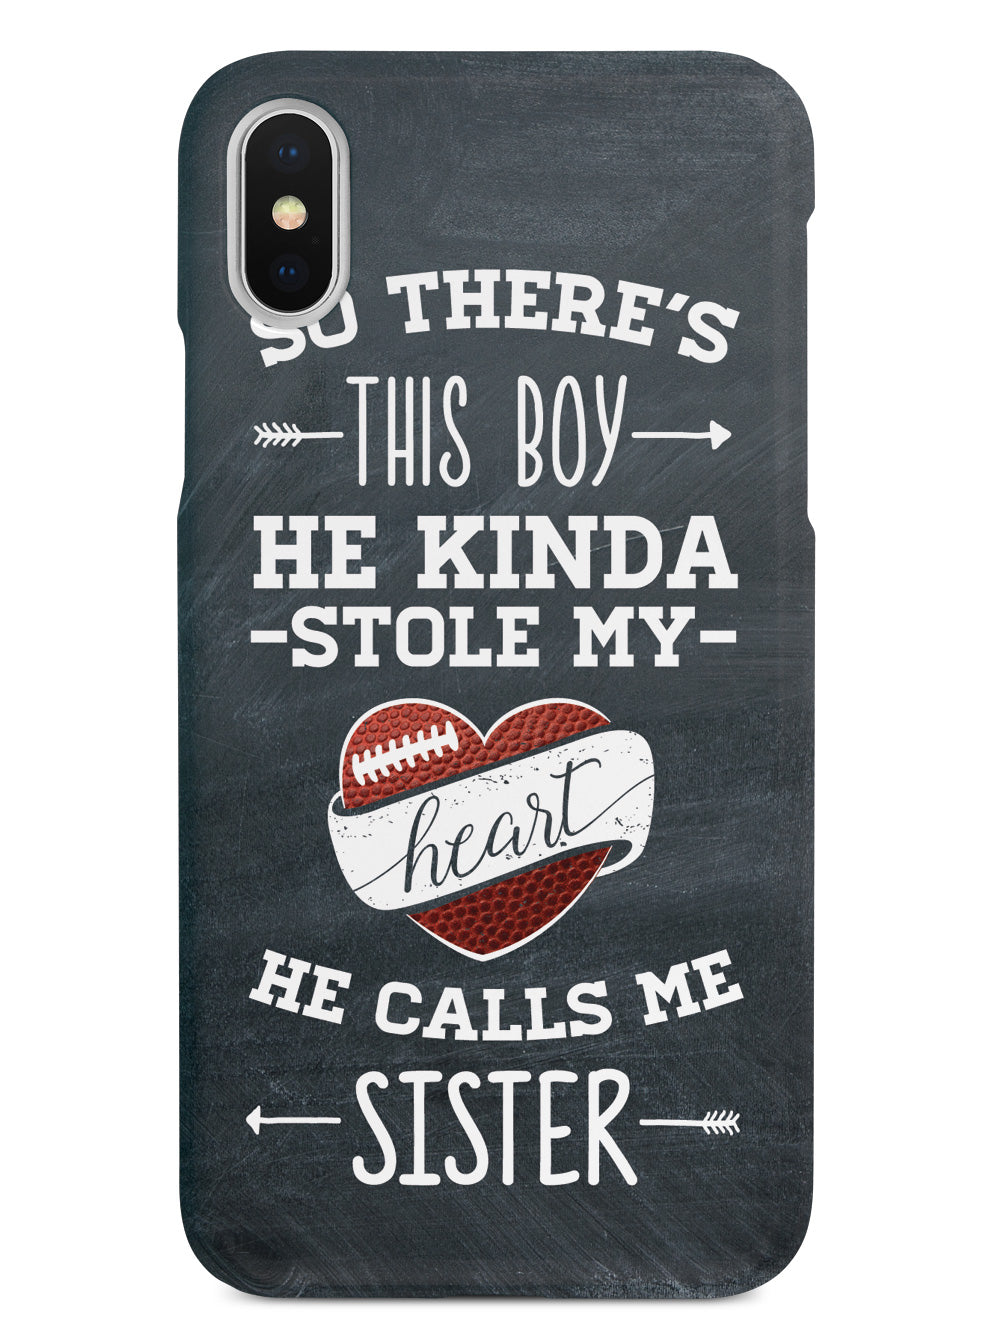 So there's this Boy - Football Player - Sister Case